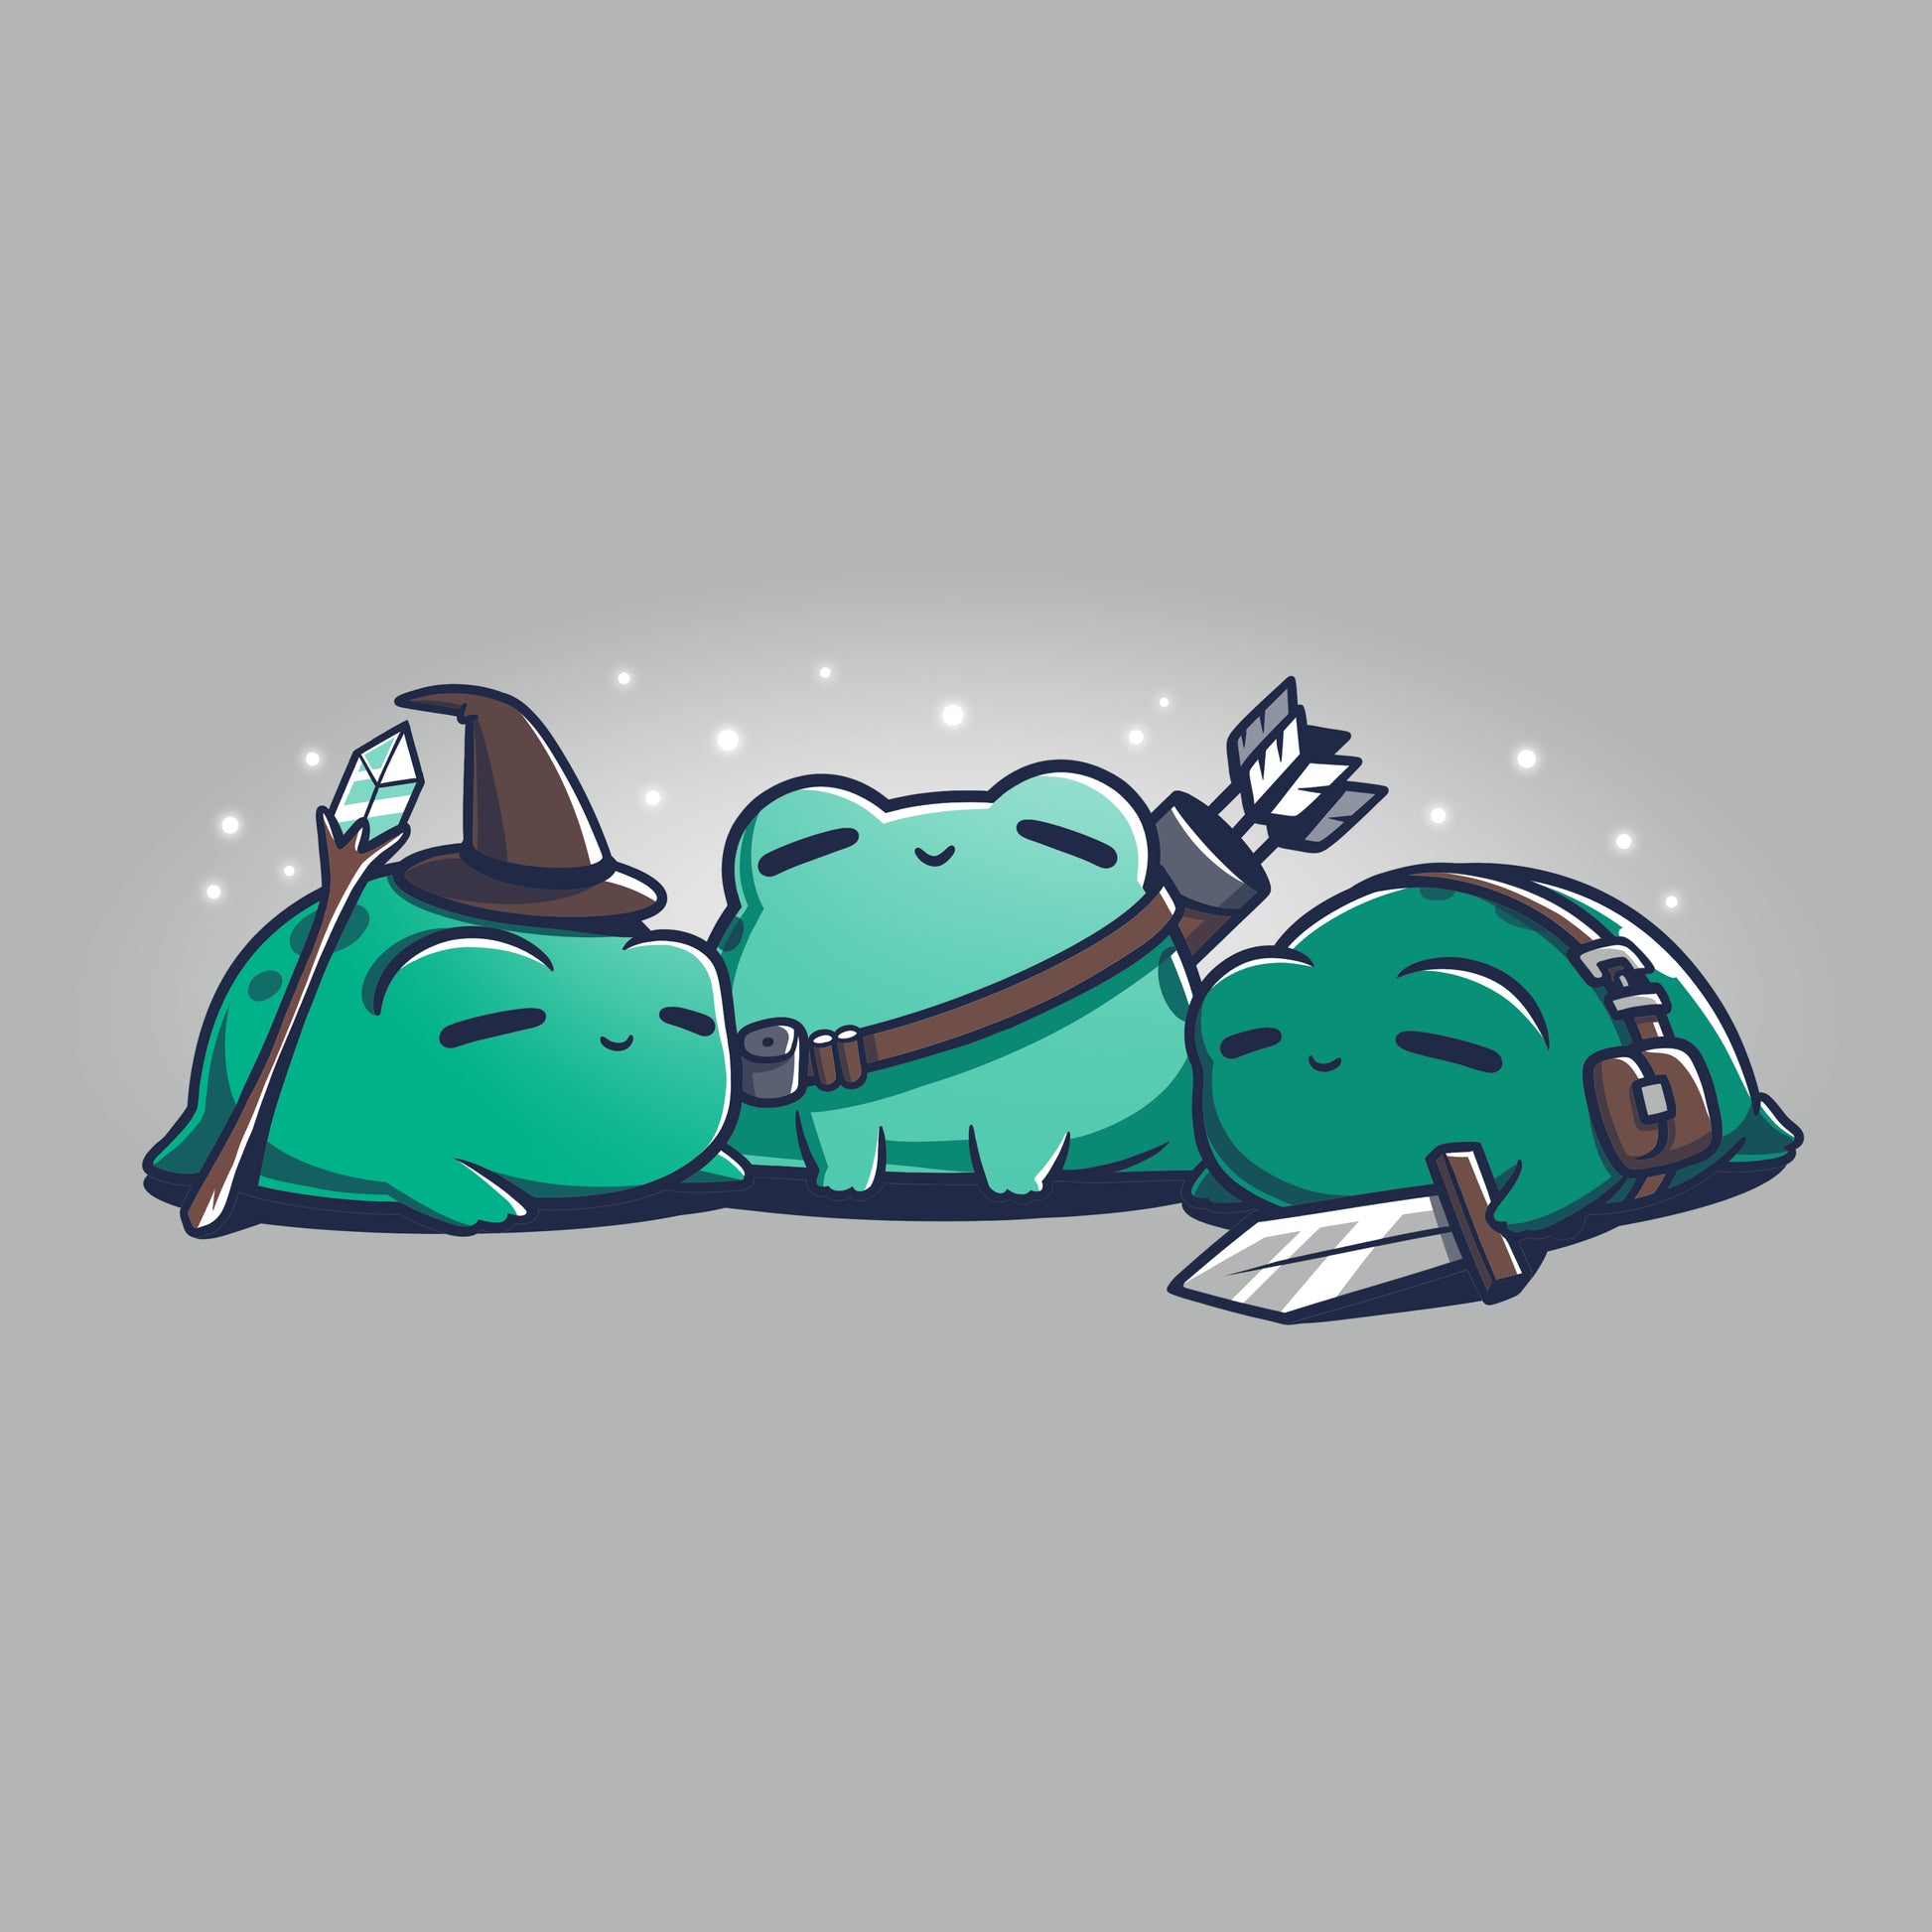 Three cartoon green frogs, each dressed as different fantasy characters: a wizard with a staff, a warrior with a bow and quiver, and a knight with a sword and helmet, on a grey background. Perfect design for monsterdigital RPG Frogs Kids T-Shirts to spark their imagination!